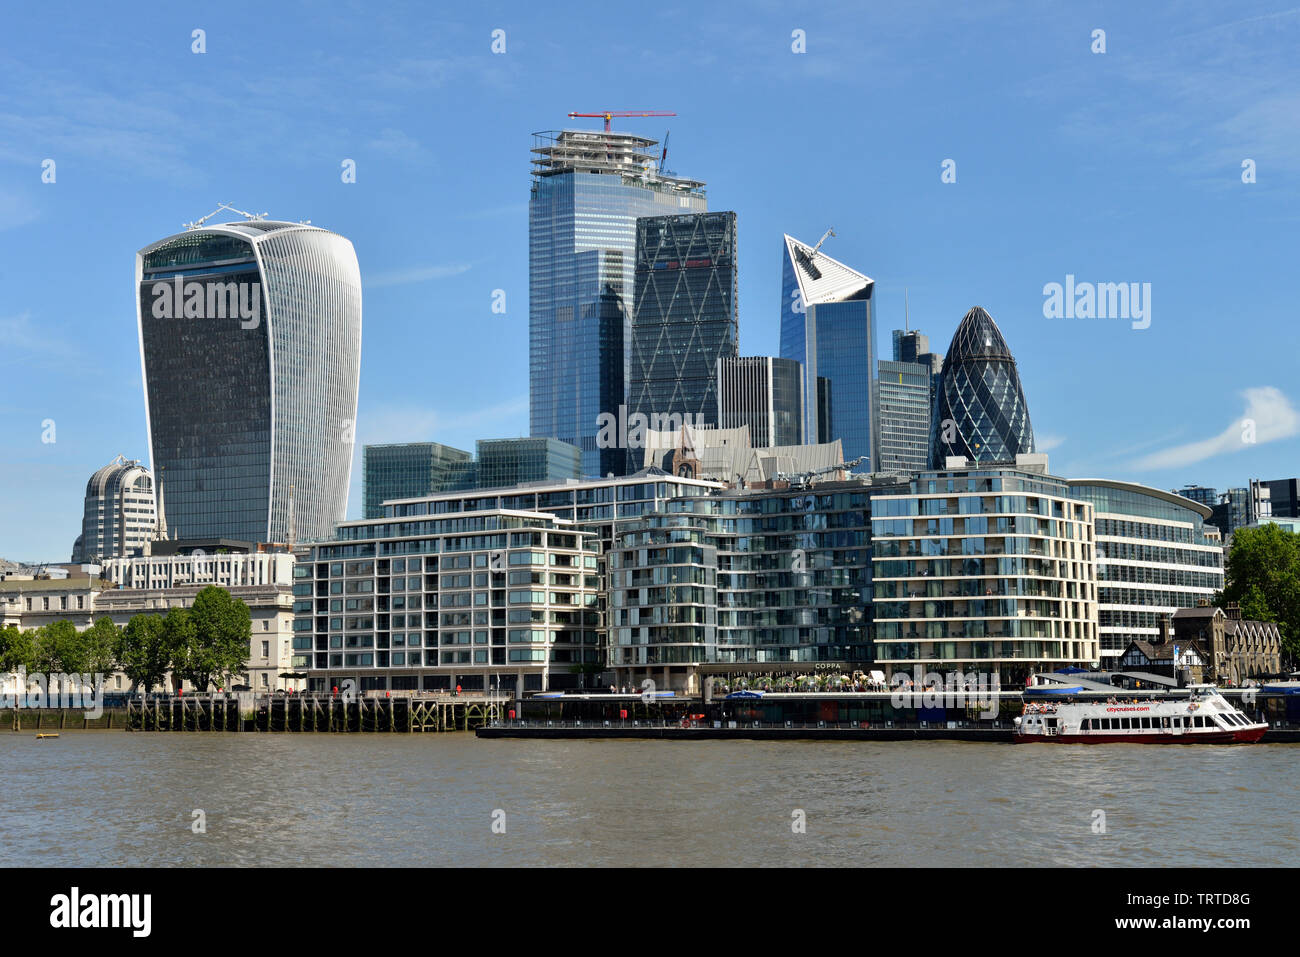 Square mile financial district and Tower Hill, City of London, United Kingdom Stock Photo